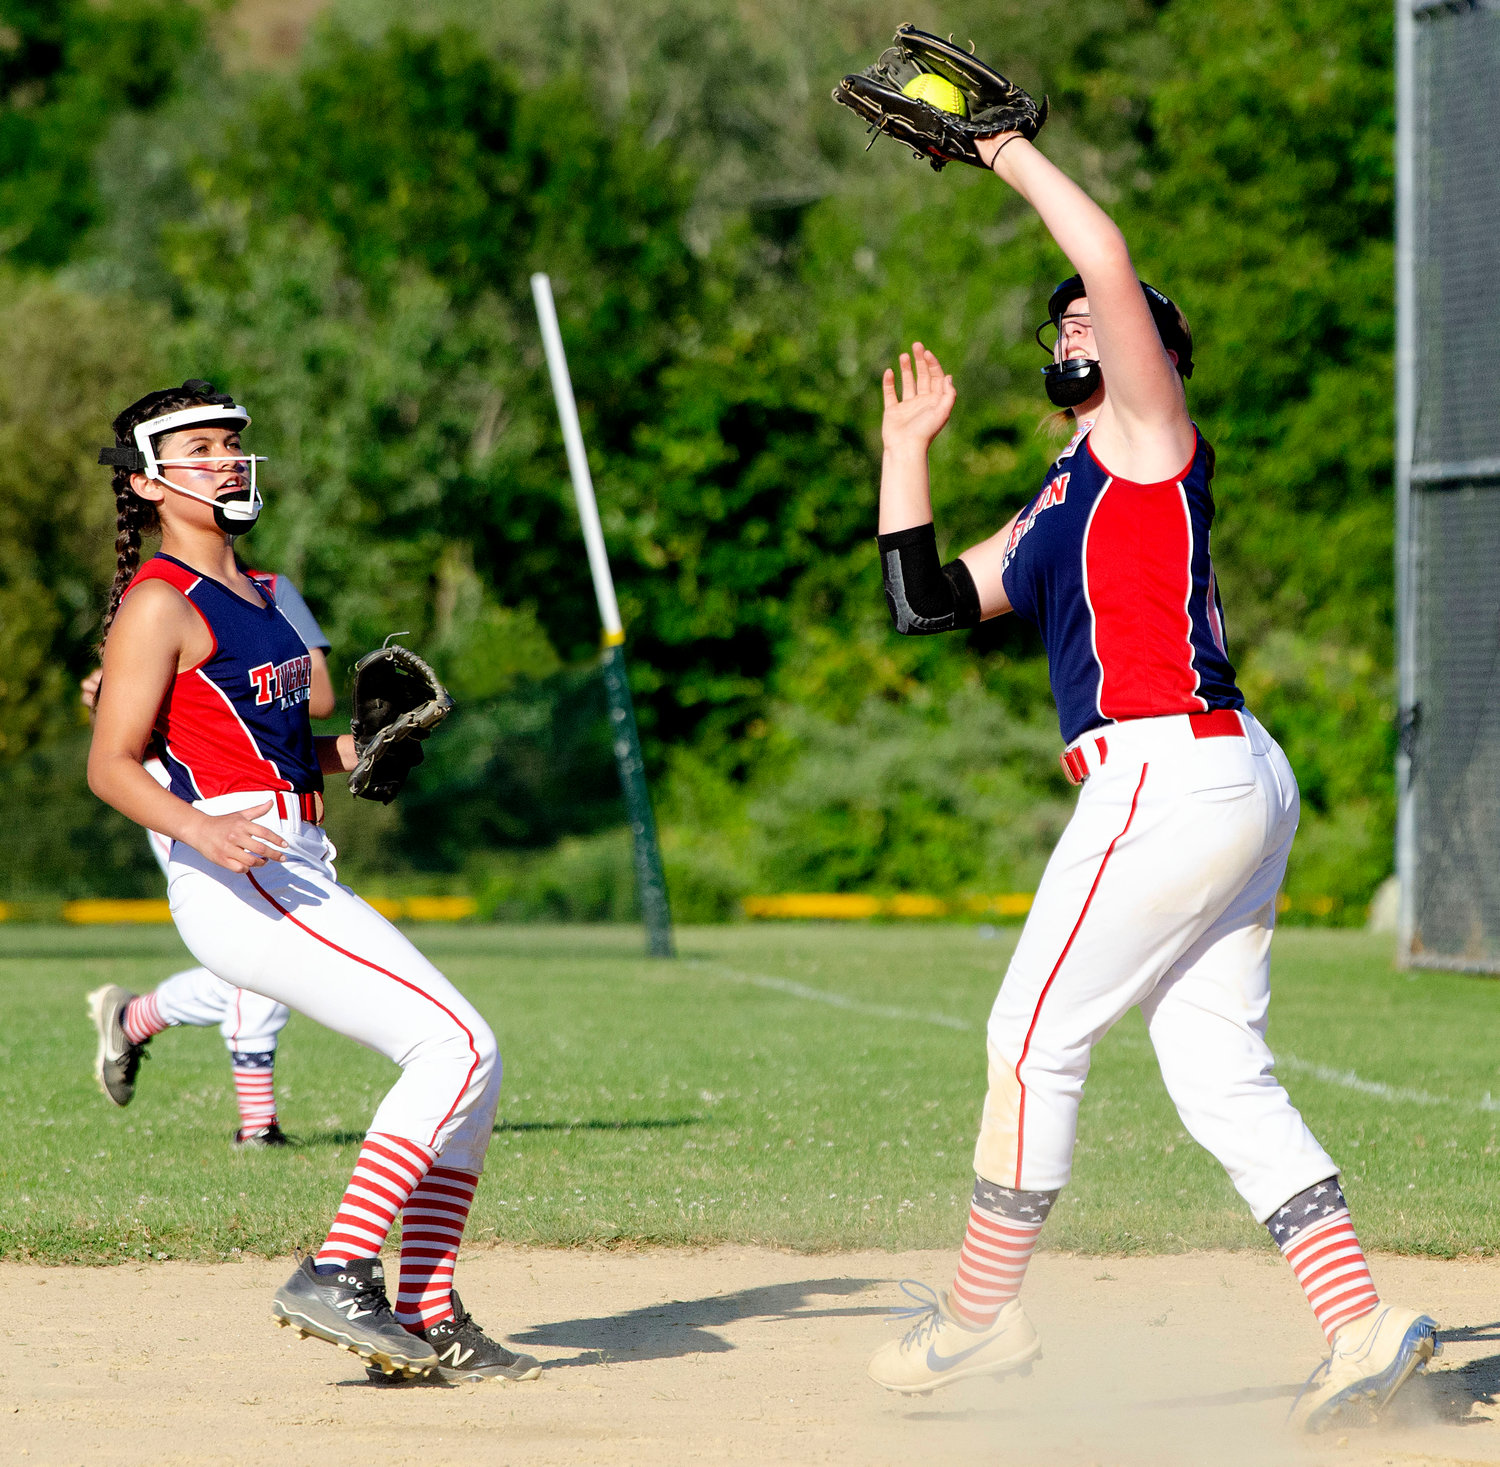 Second baseman Sophia Morales (left) looks on as first baseman Carlie Martin (right) snags a pop fly in the first inning.